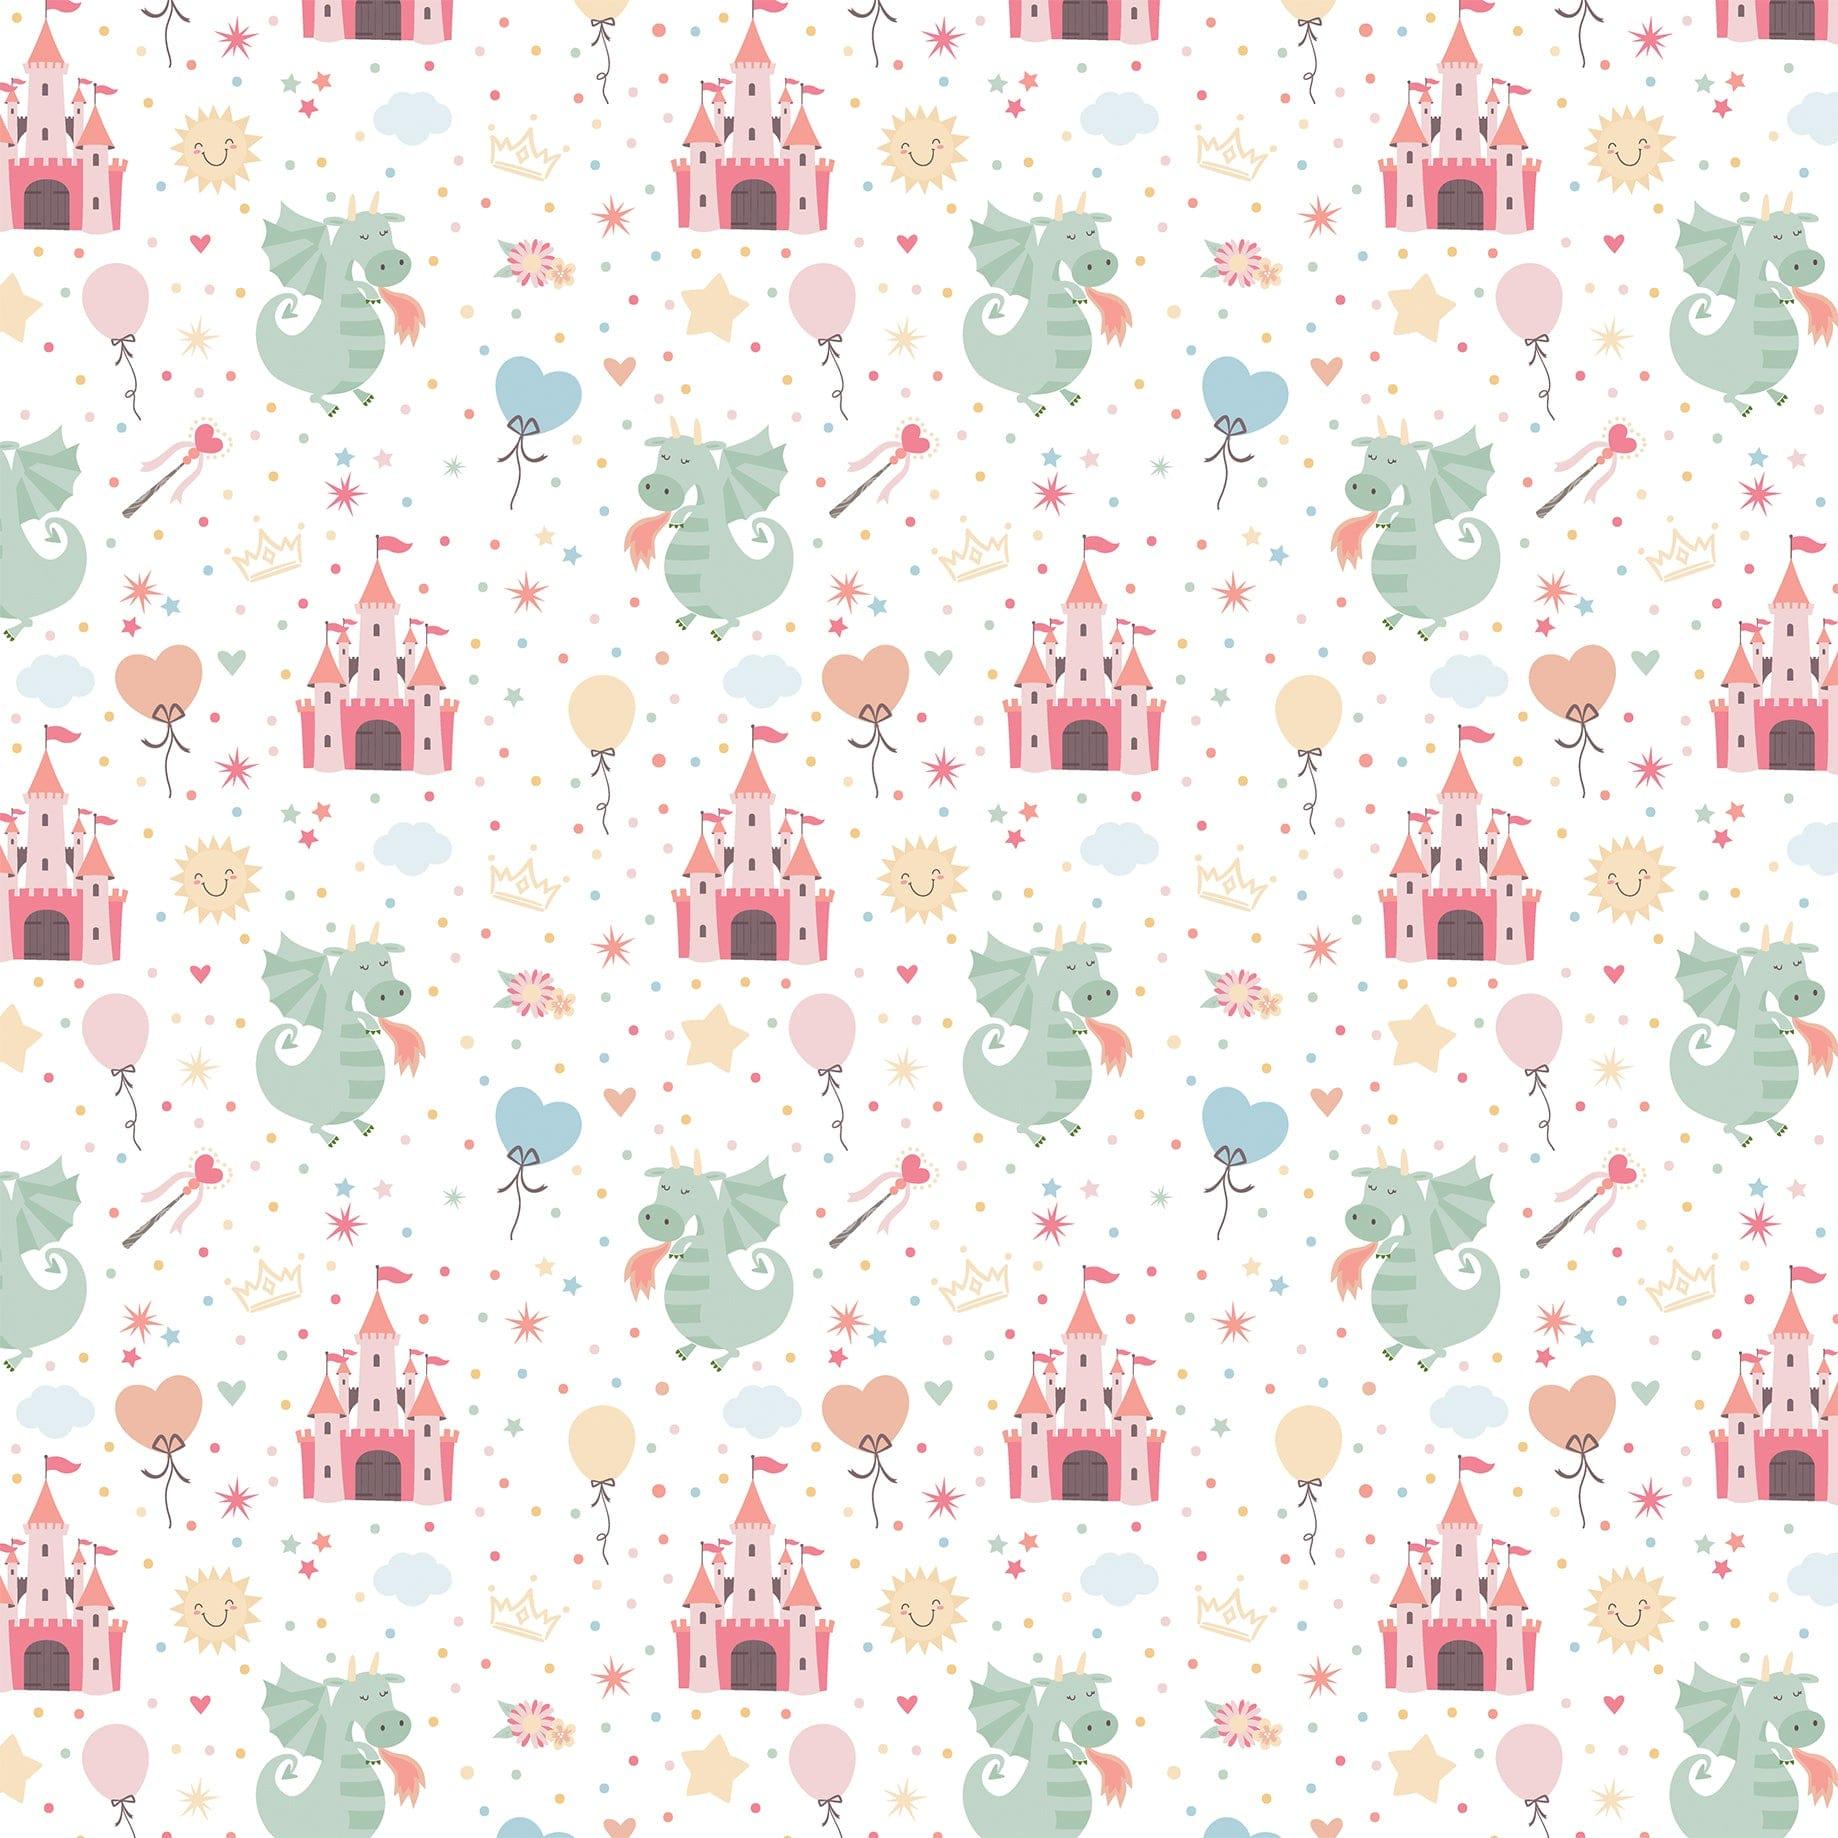 Our Little Princess Collection Kingdom 12 x 12 Double-Sided Scrapbook Paper by Echo Park Paper - Scrapbook Supply Companies